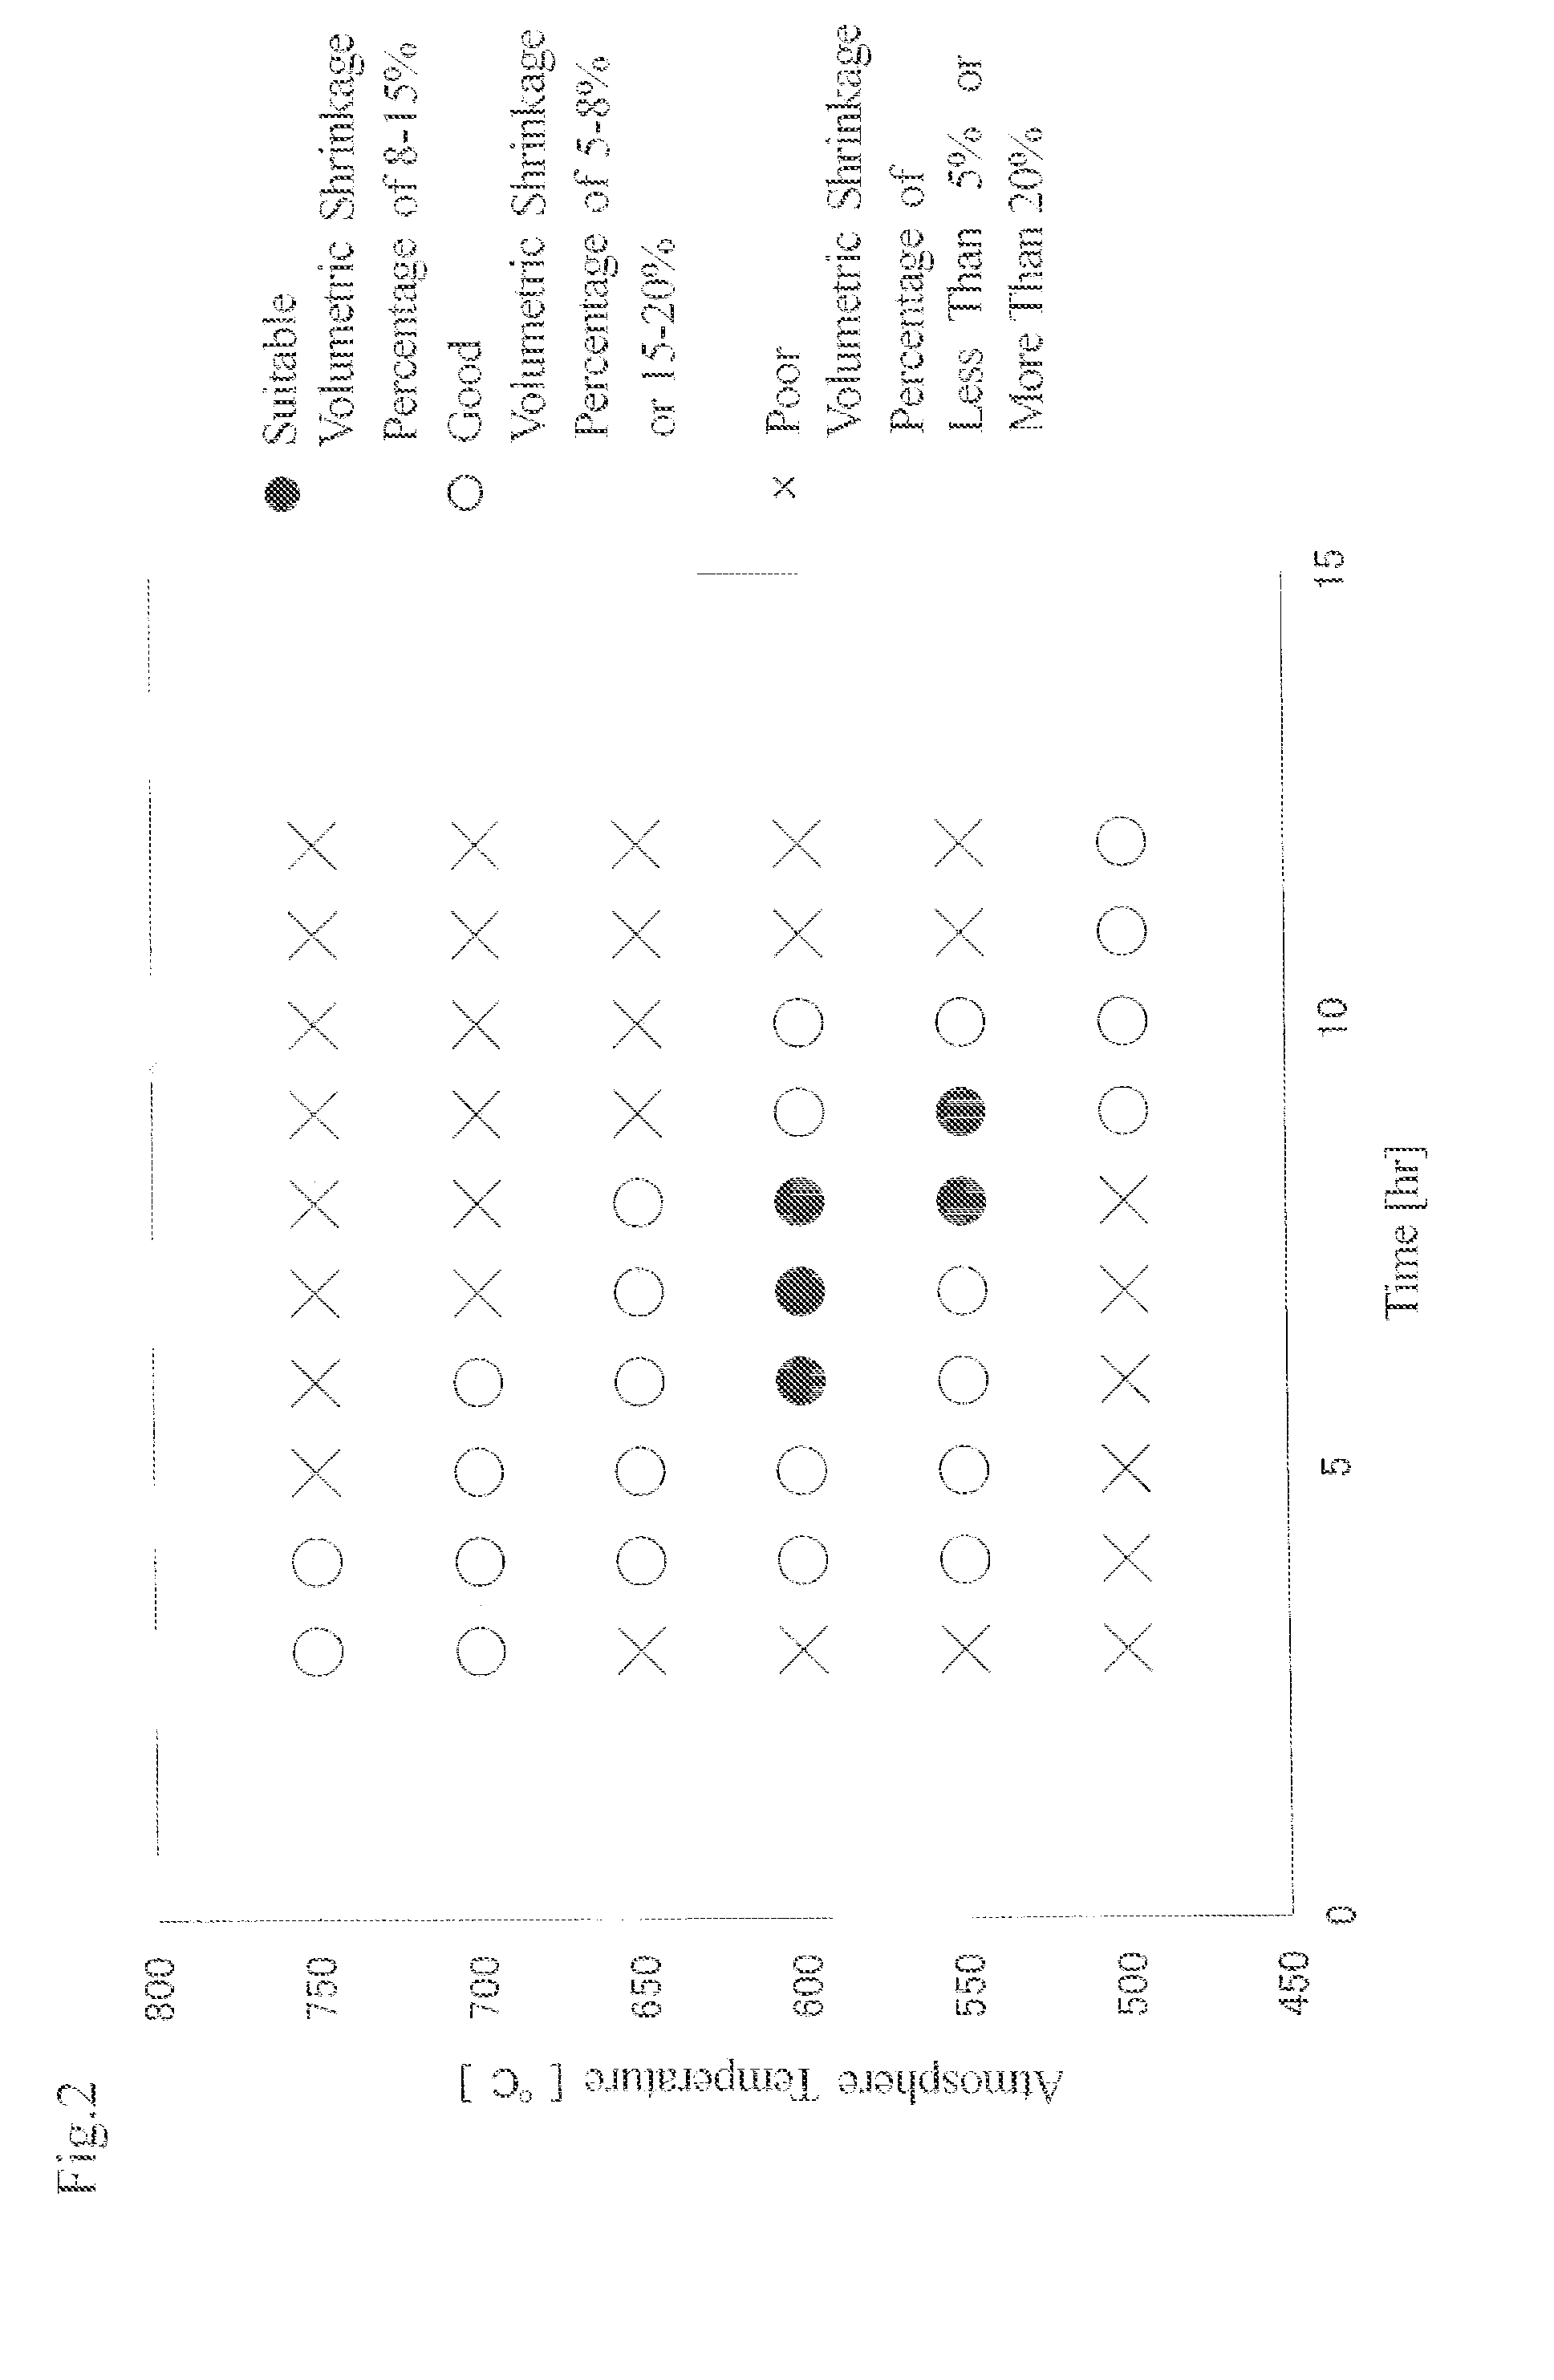 Fluoride sintered body for neutron moderator and method for producing the same